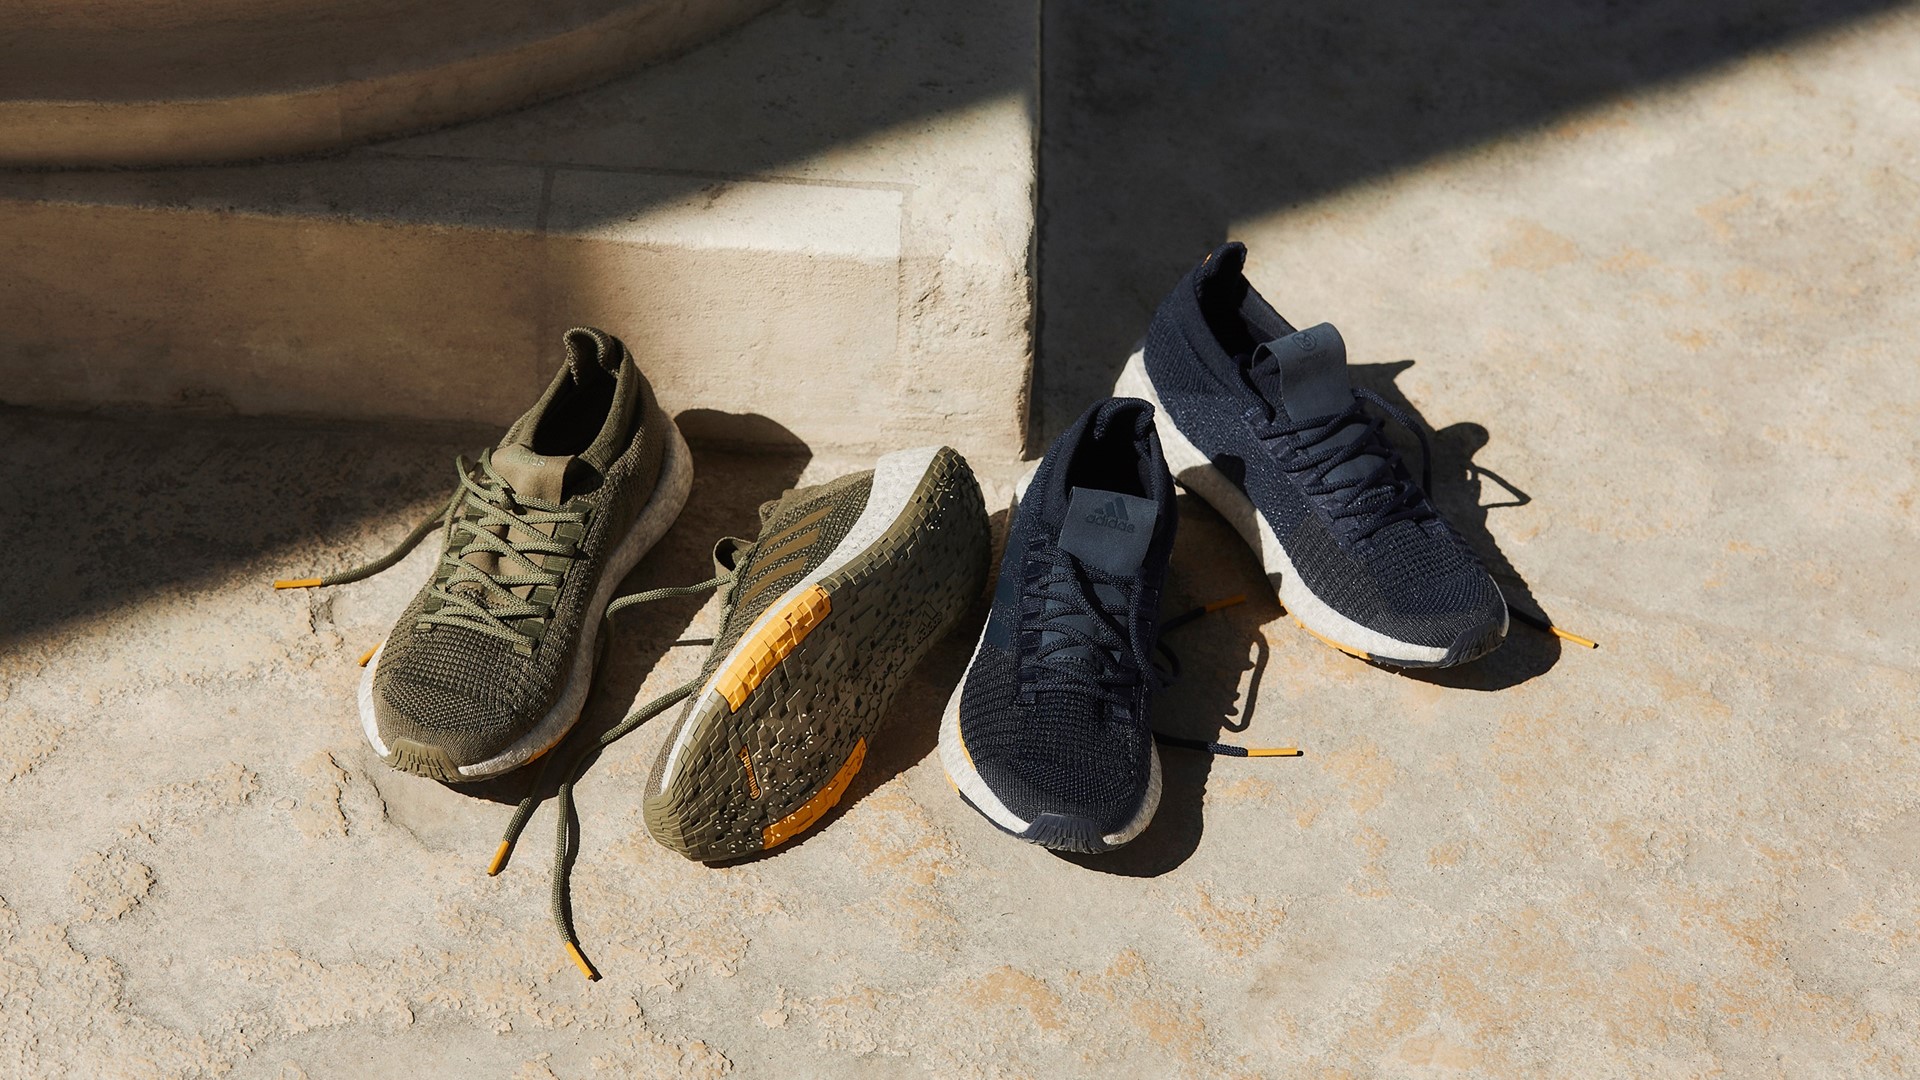 adidas and Monocle Team Up For the Latest Run City Pack